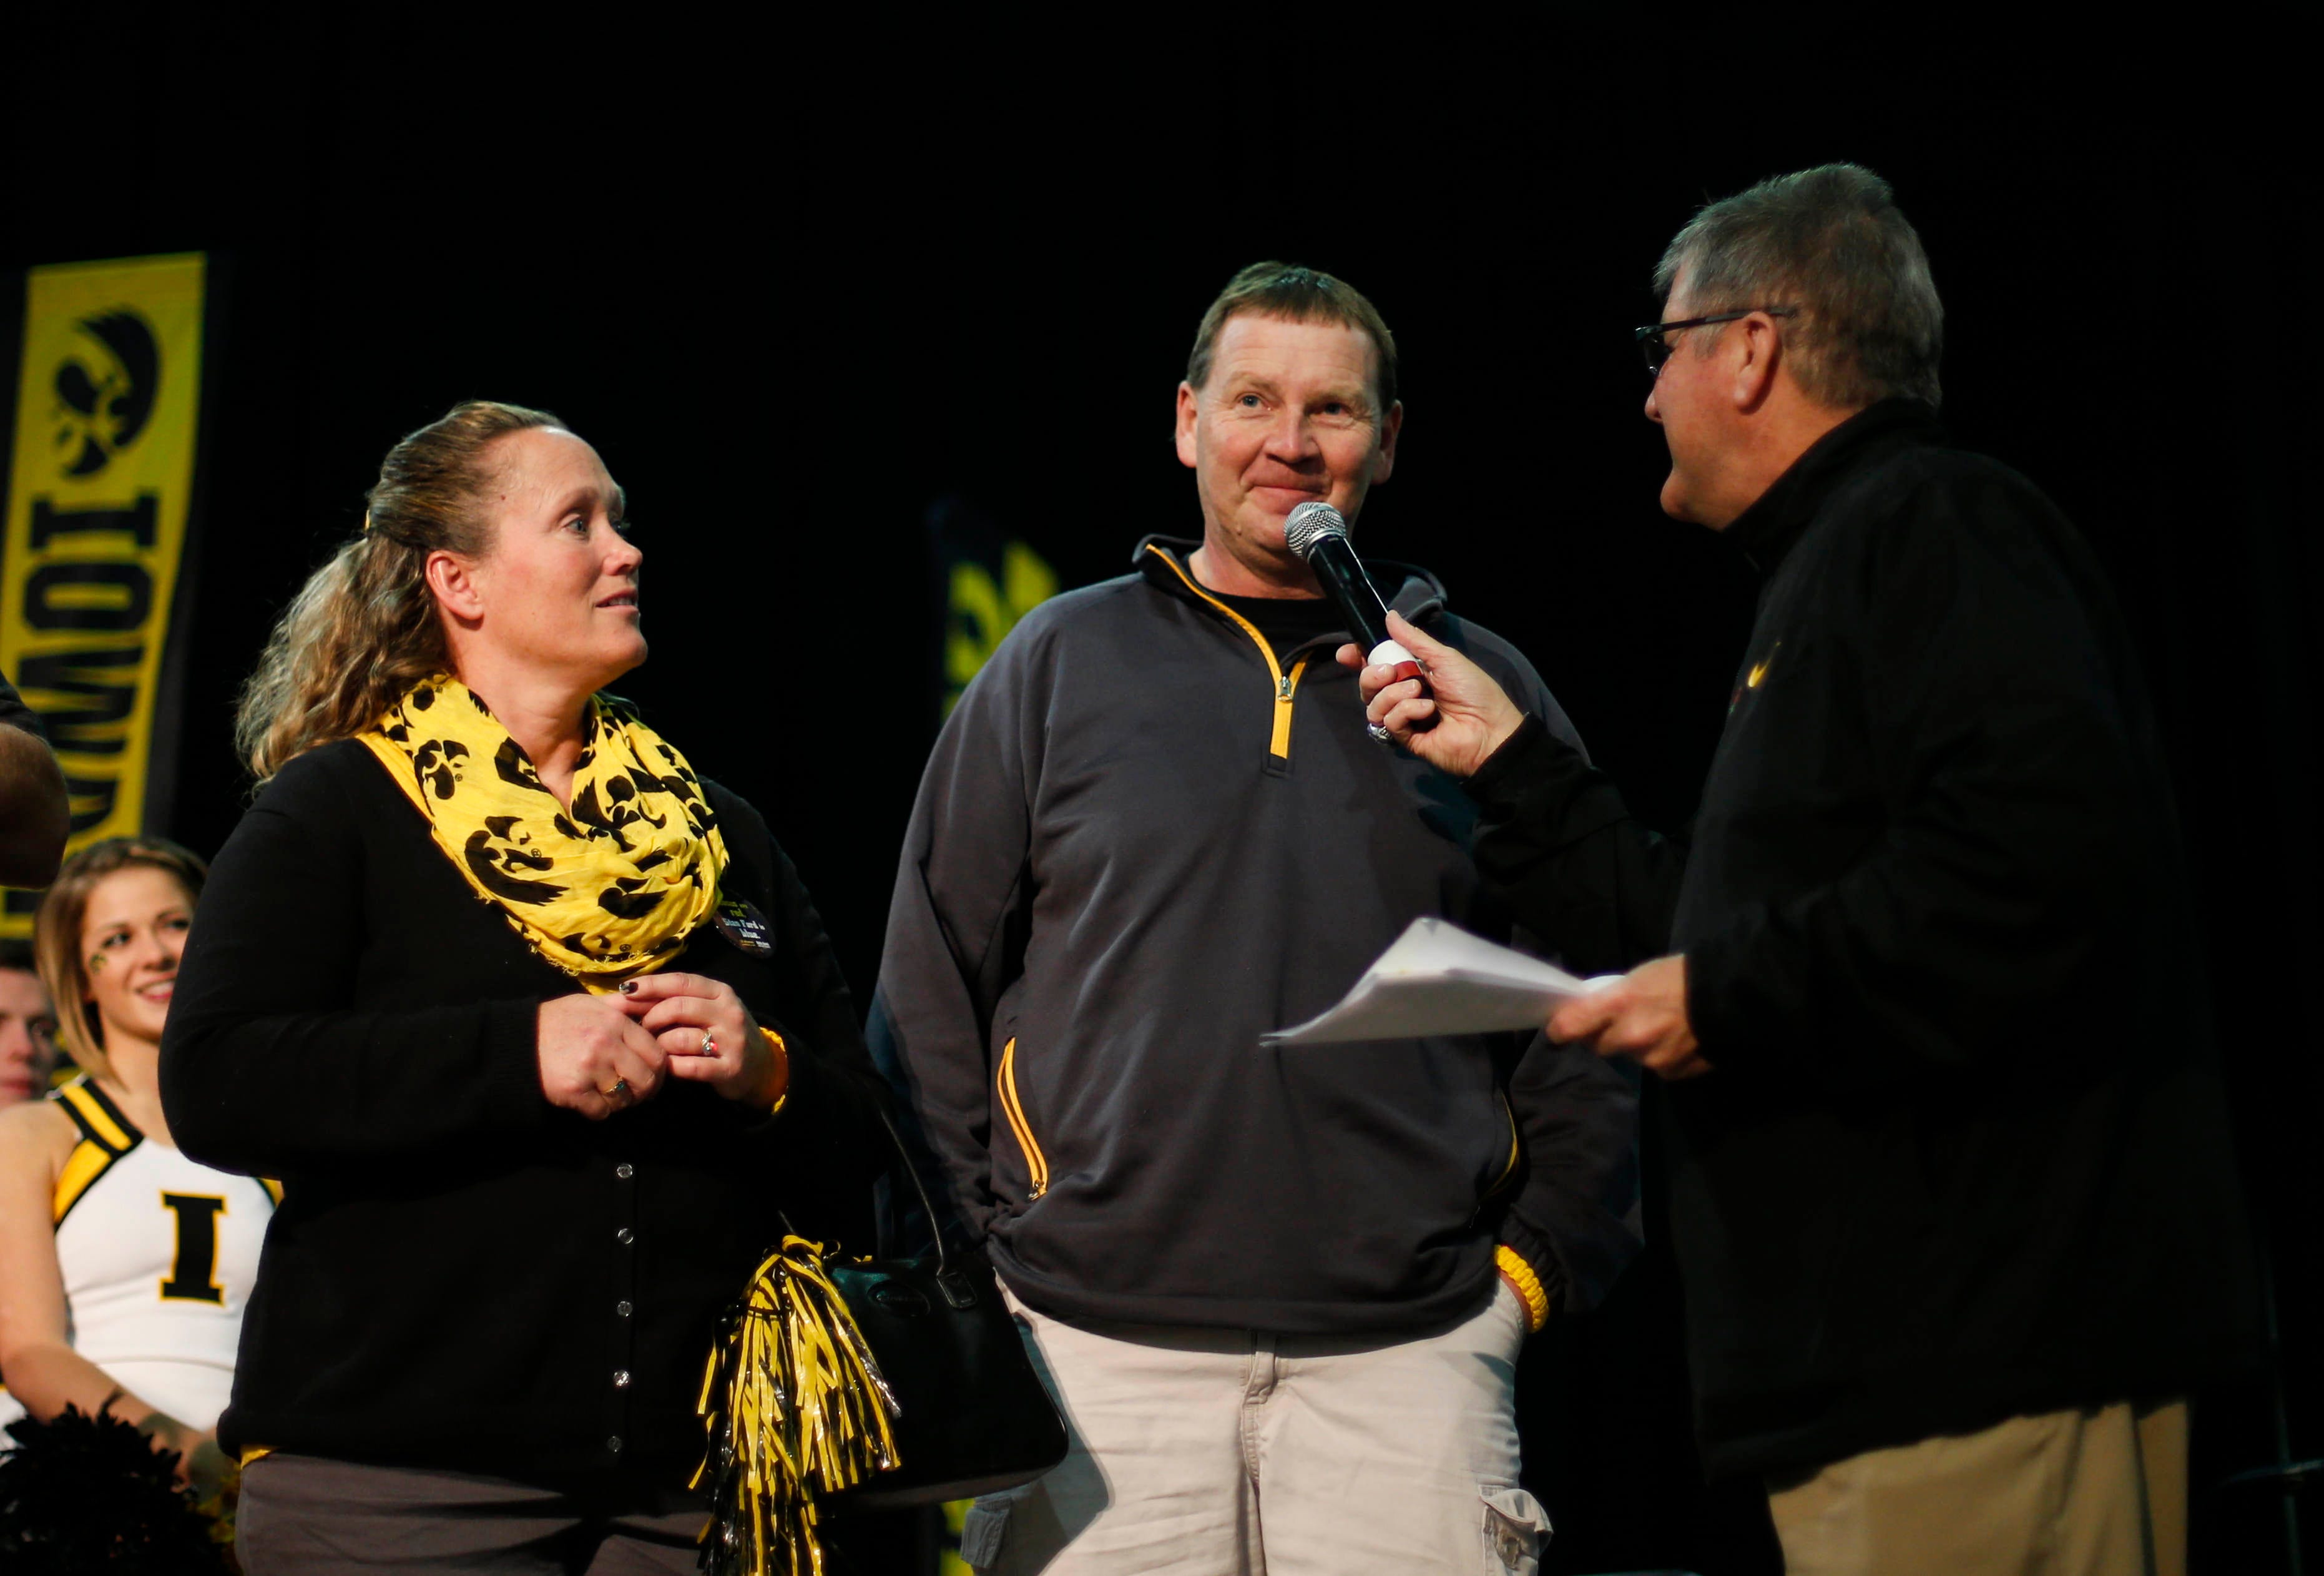 Iowa Hawkeye radio broadcaster Gary Dolphin speaks with the parents of Hawkeyes defensive end Parker Hesse during the Hawkeye Huddle on Wednesday, Dec. 30, 2015, at the Los Angeles Convention Center.